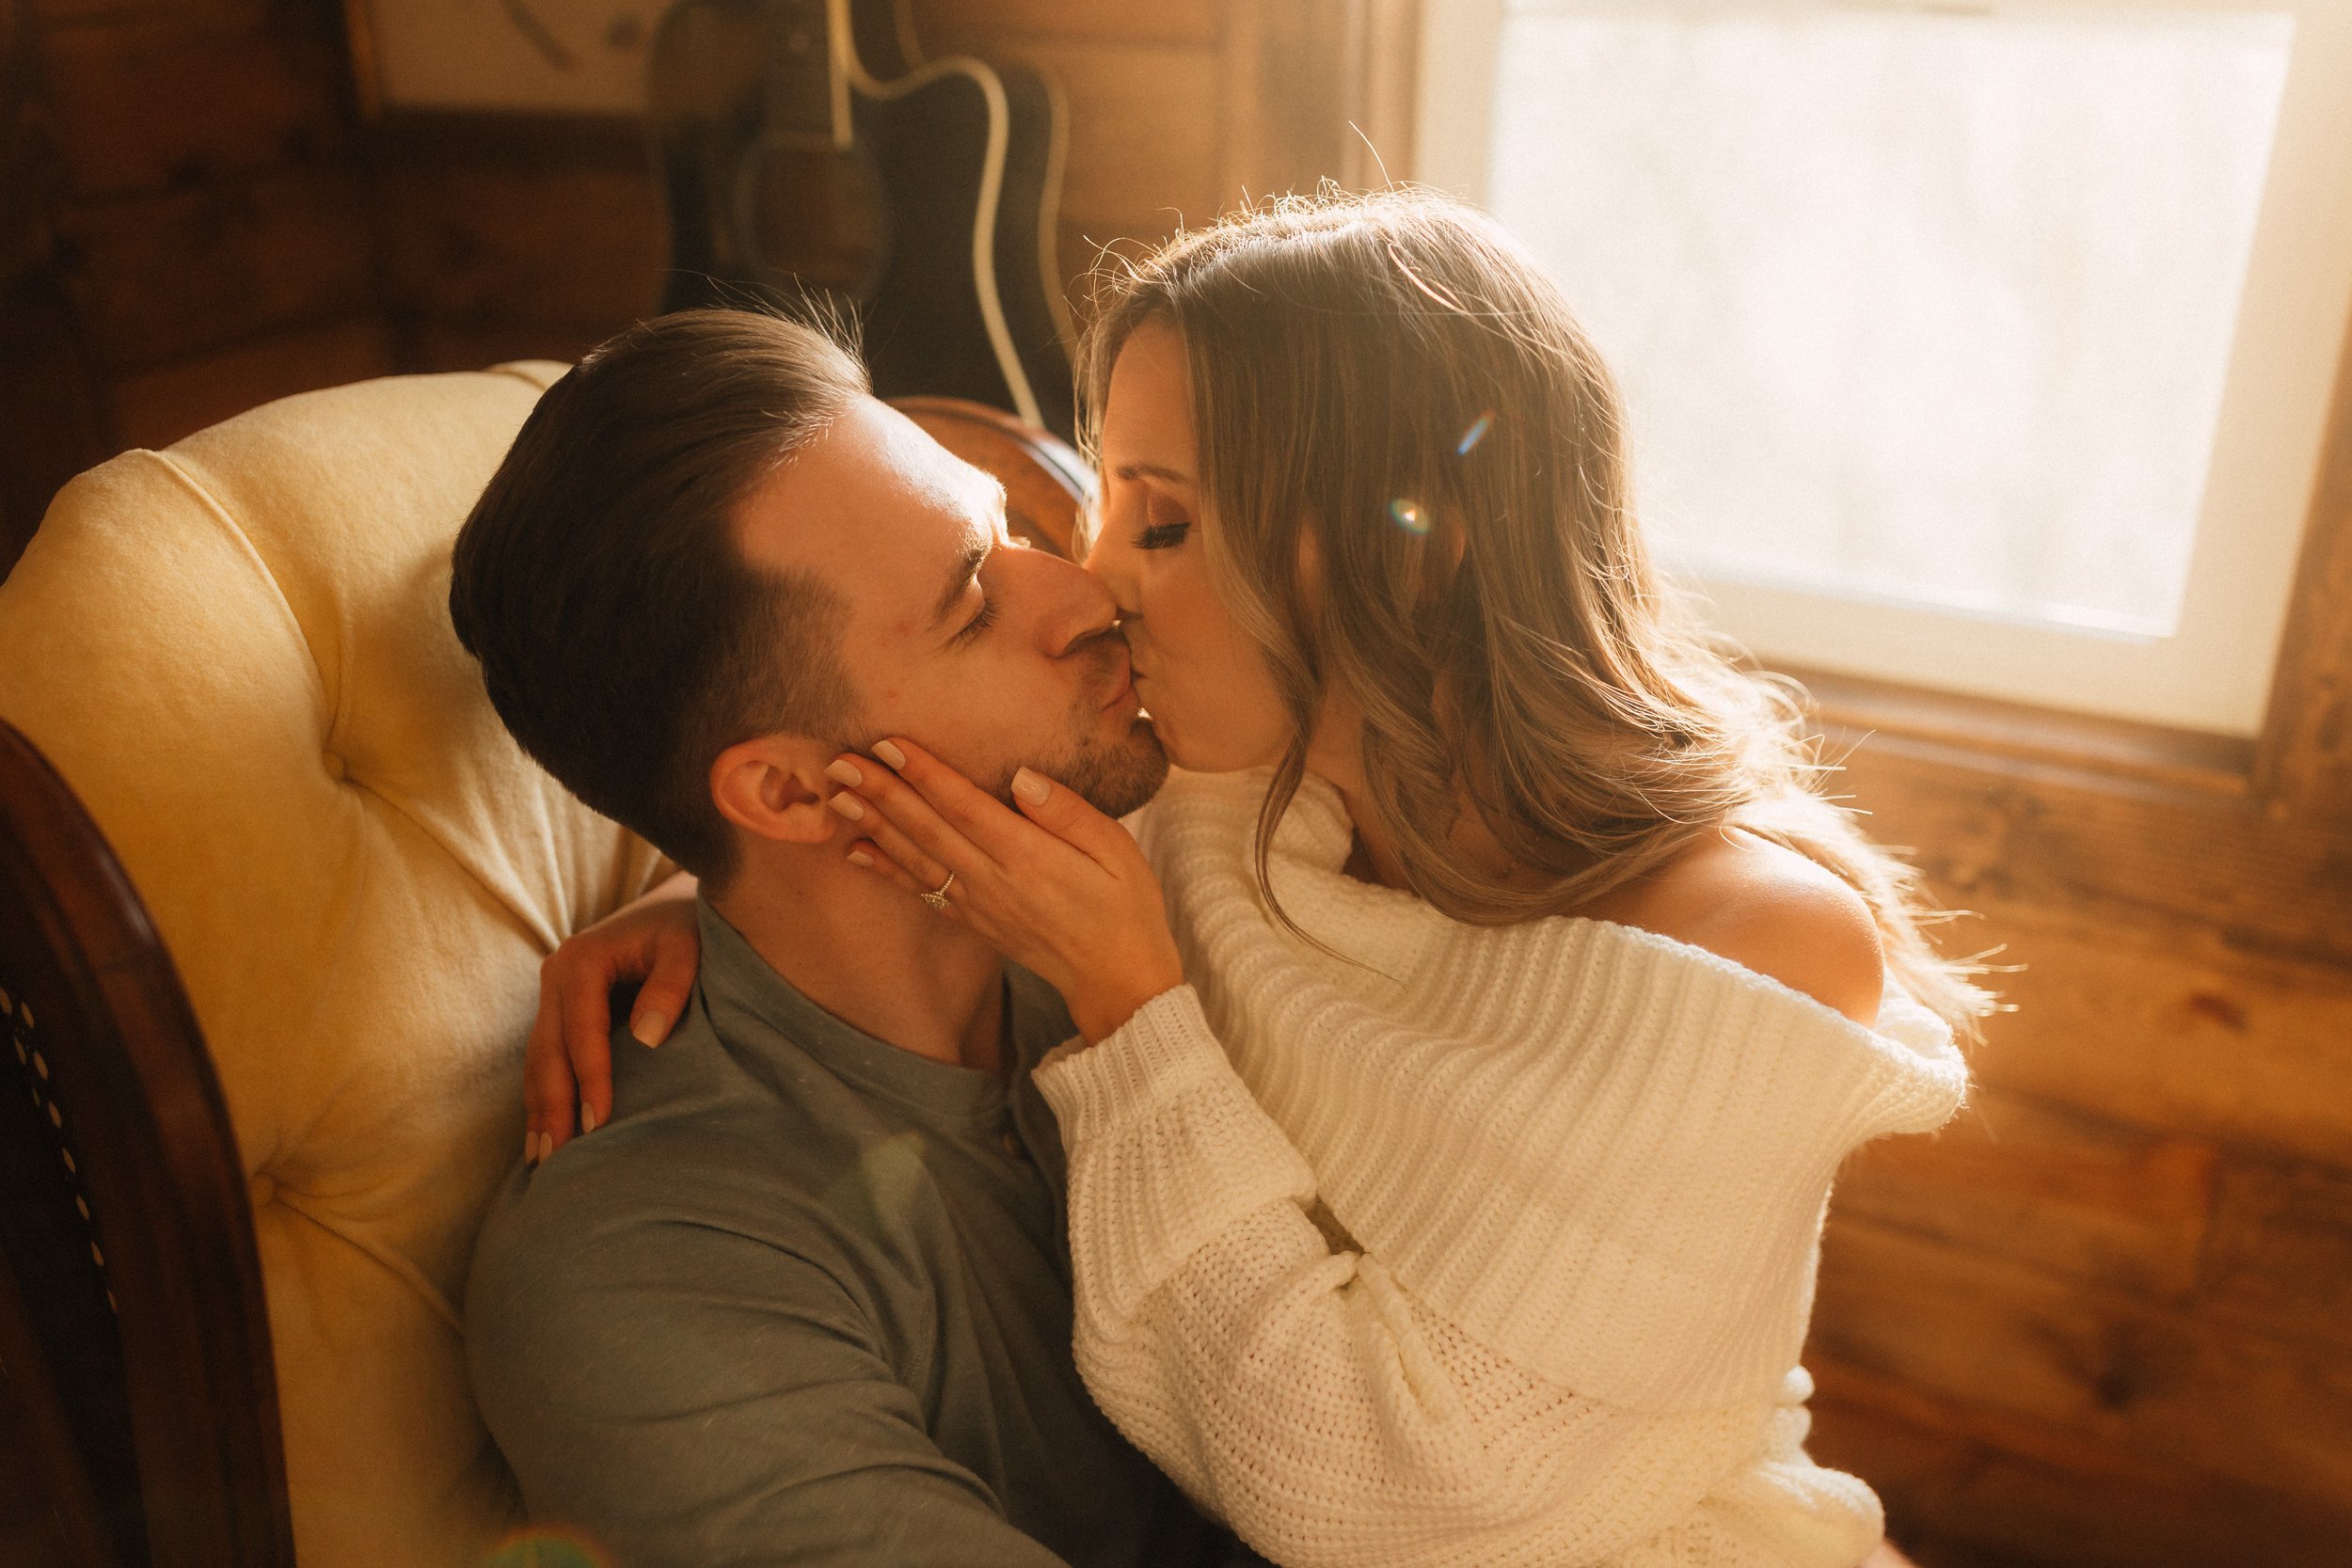 Laura_Ben_Engagment_Session_Winterset_Des_moines_Iowa_Couples_Photographer_Iris_Aisle_Cabin_Conservatory_Candid_Snow_Day_Winter_KMP_Photography-0433.jpg